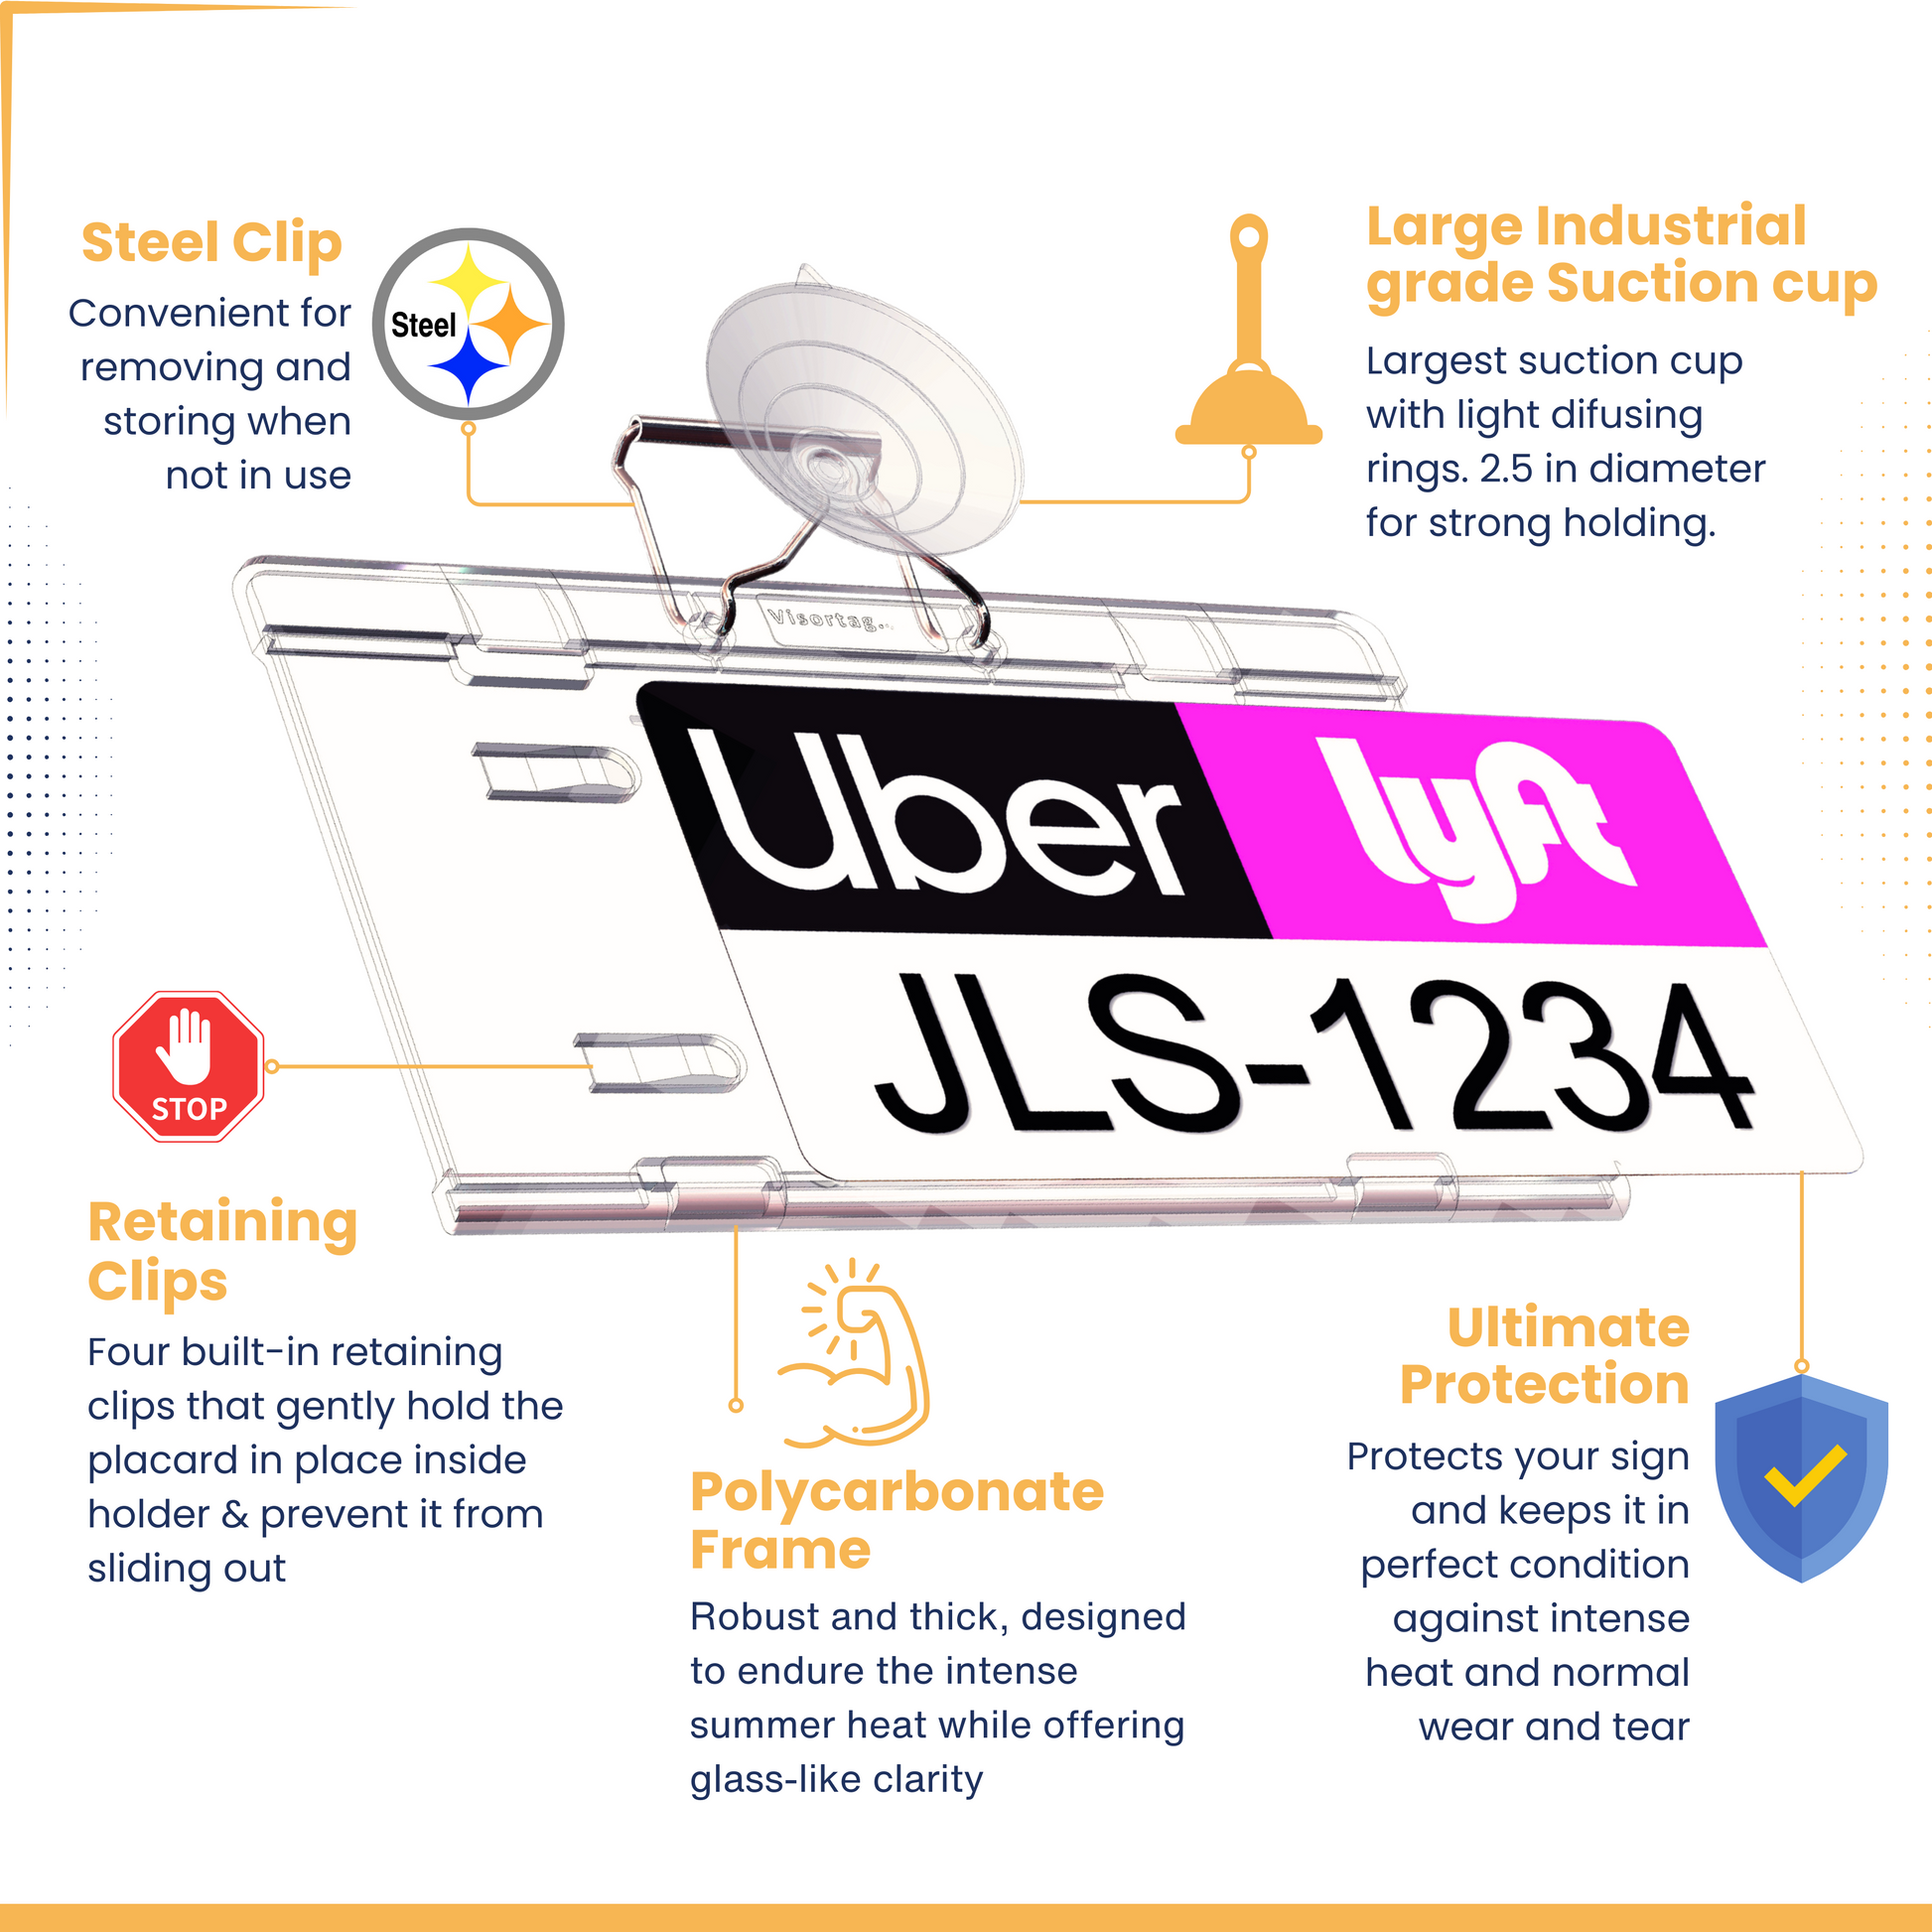 Uber & Lyft sign holder features. Large suction cup, sturdy holder, glass clarity, steel clip, emblem protection and license plate display